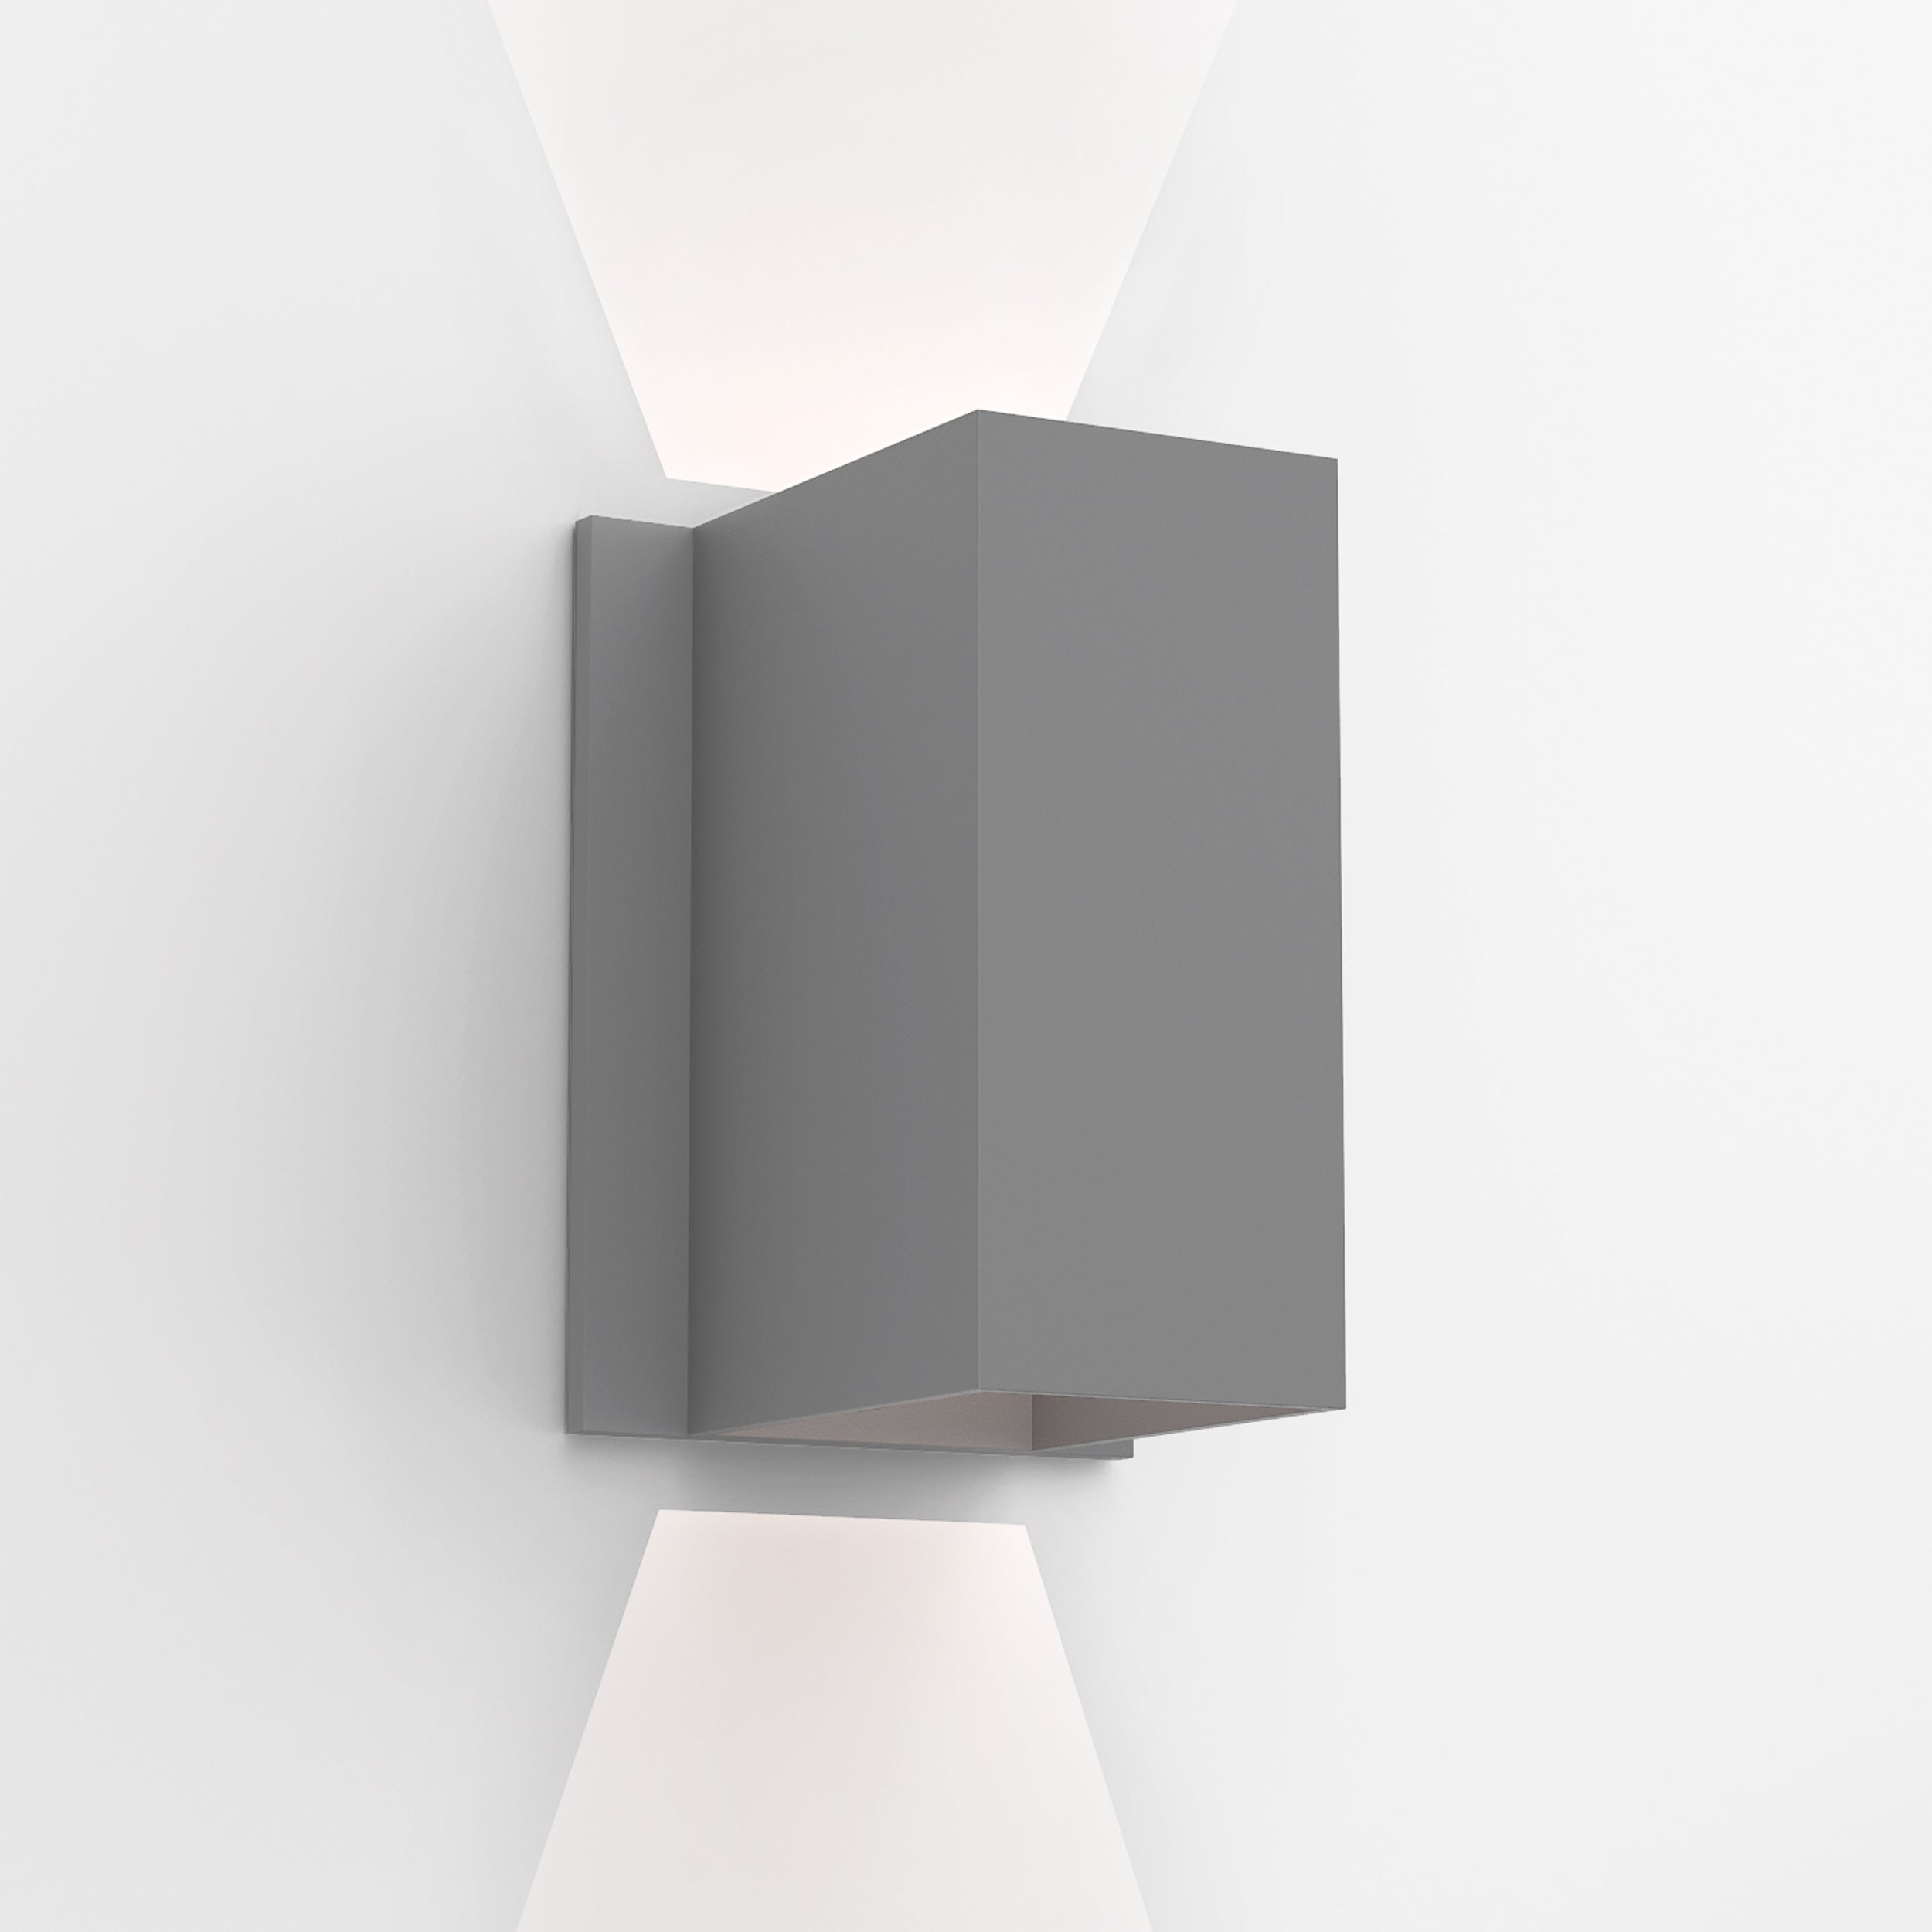 Astro Lighting Oslo Wall Light Fixtures Astro Lighting 4.17x4.33x6.3 Textured Grey Yes (Integral), High Power LED